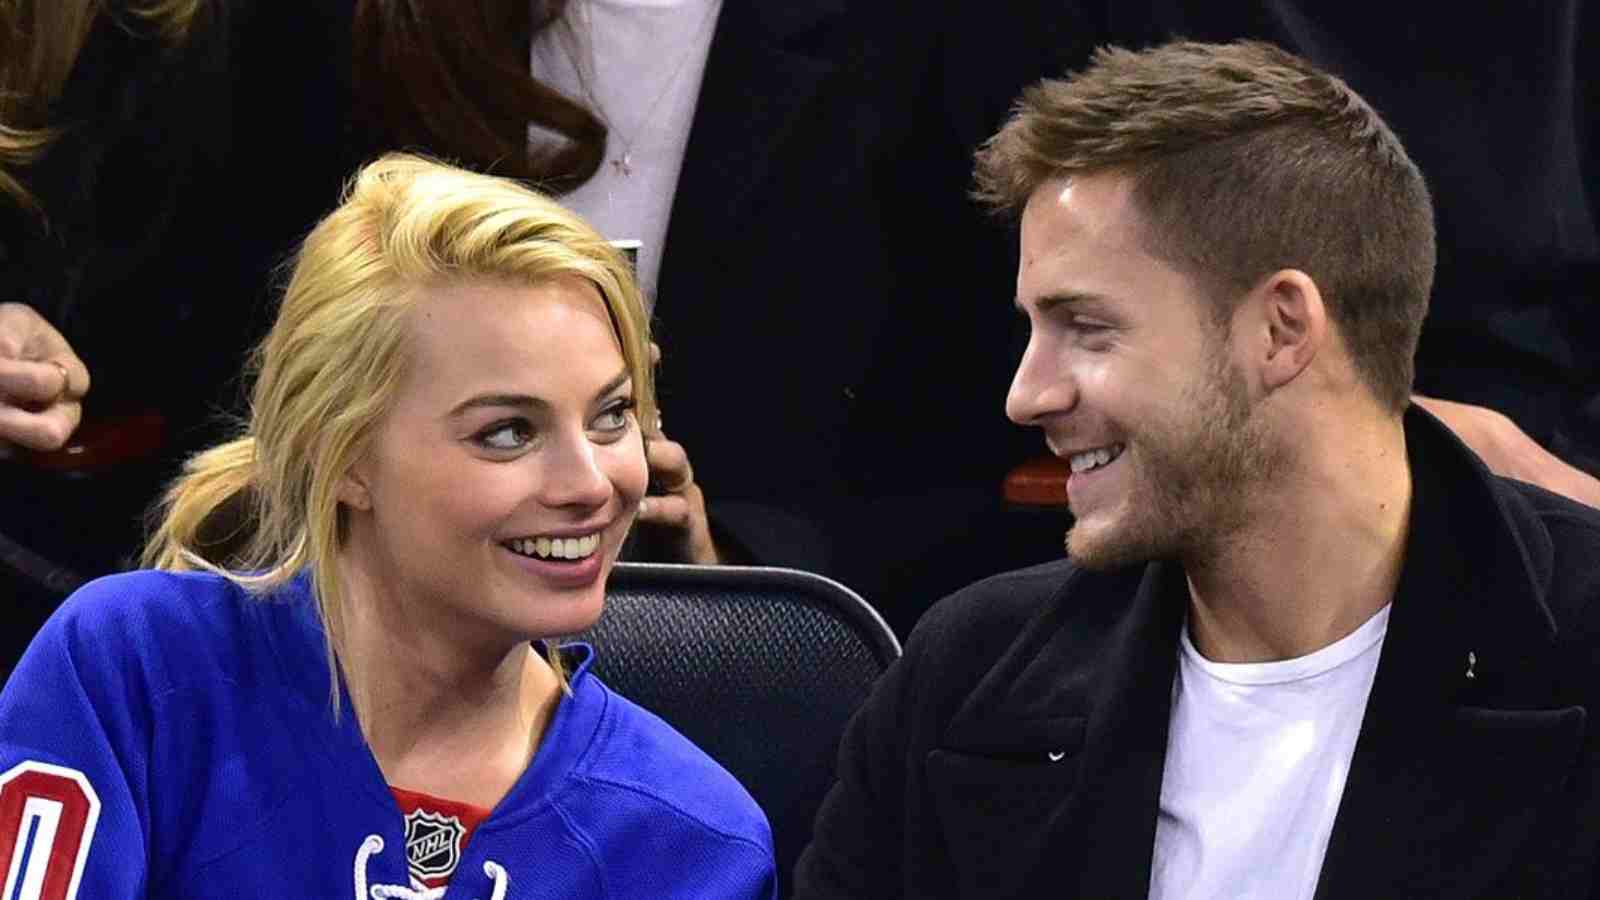 Who Is Margot Robbie's Husband? Know All About Tom Ackerley